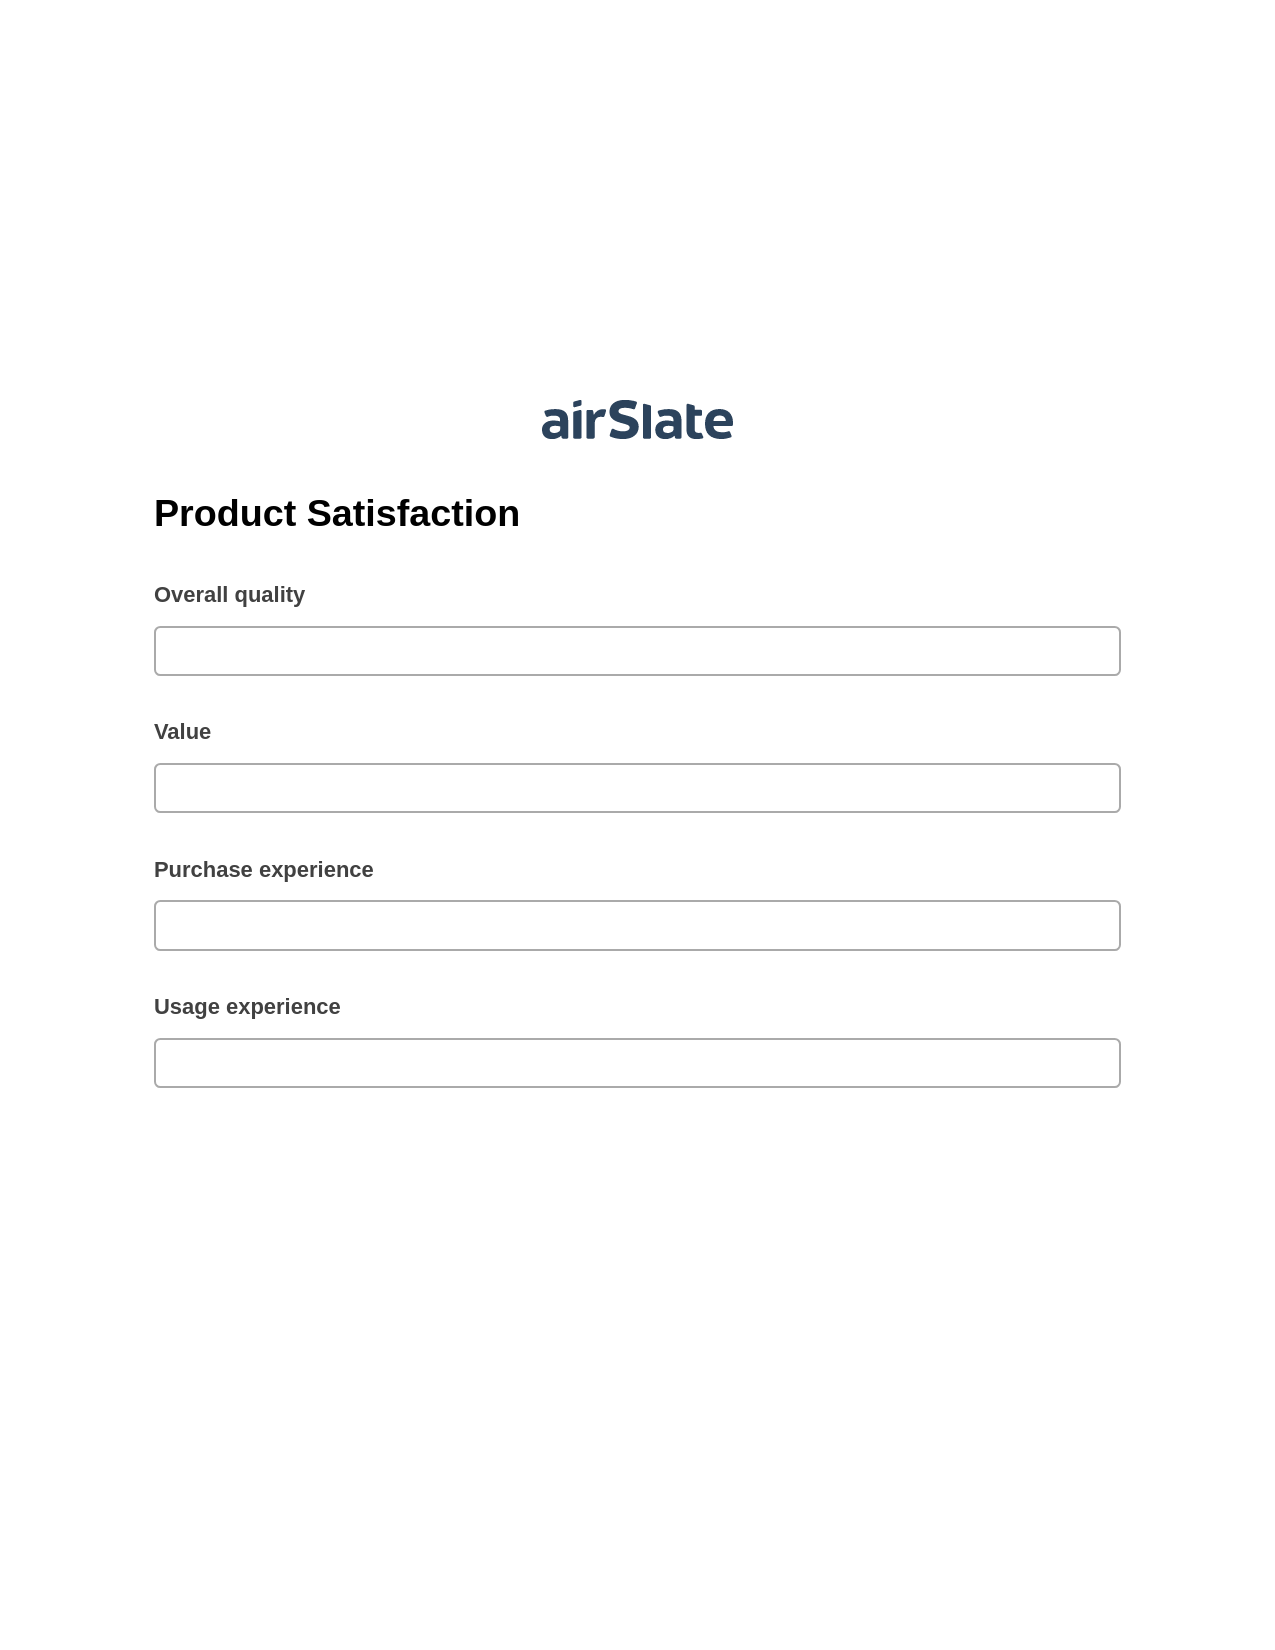 Product Satisfaction Pre-fill from CSV File Bot, Audit Trail Bot, Dropbox Bot